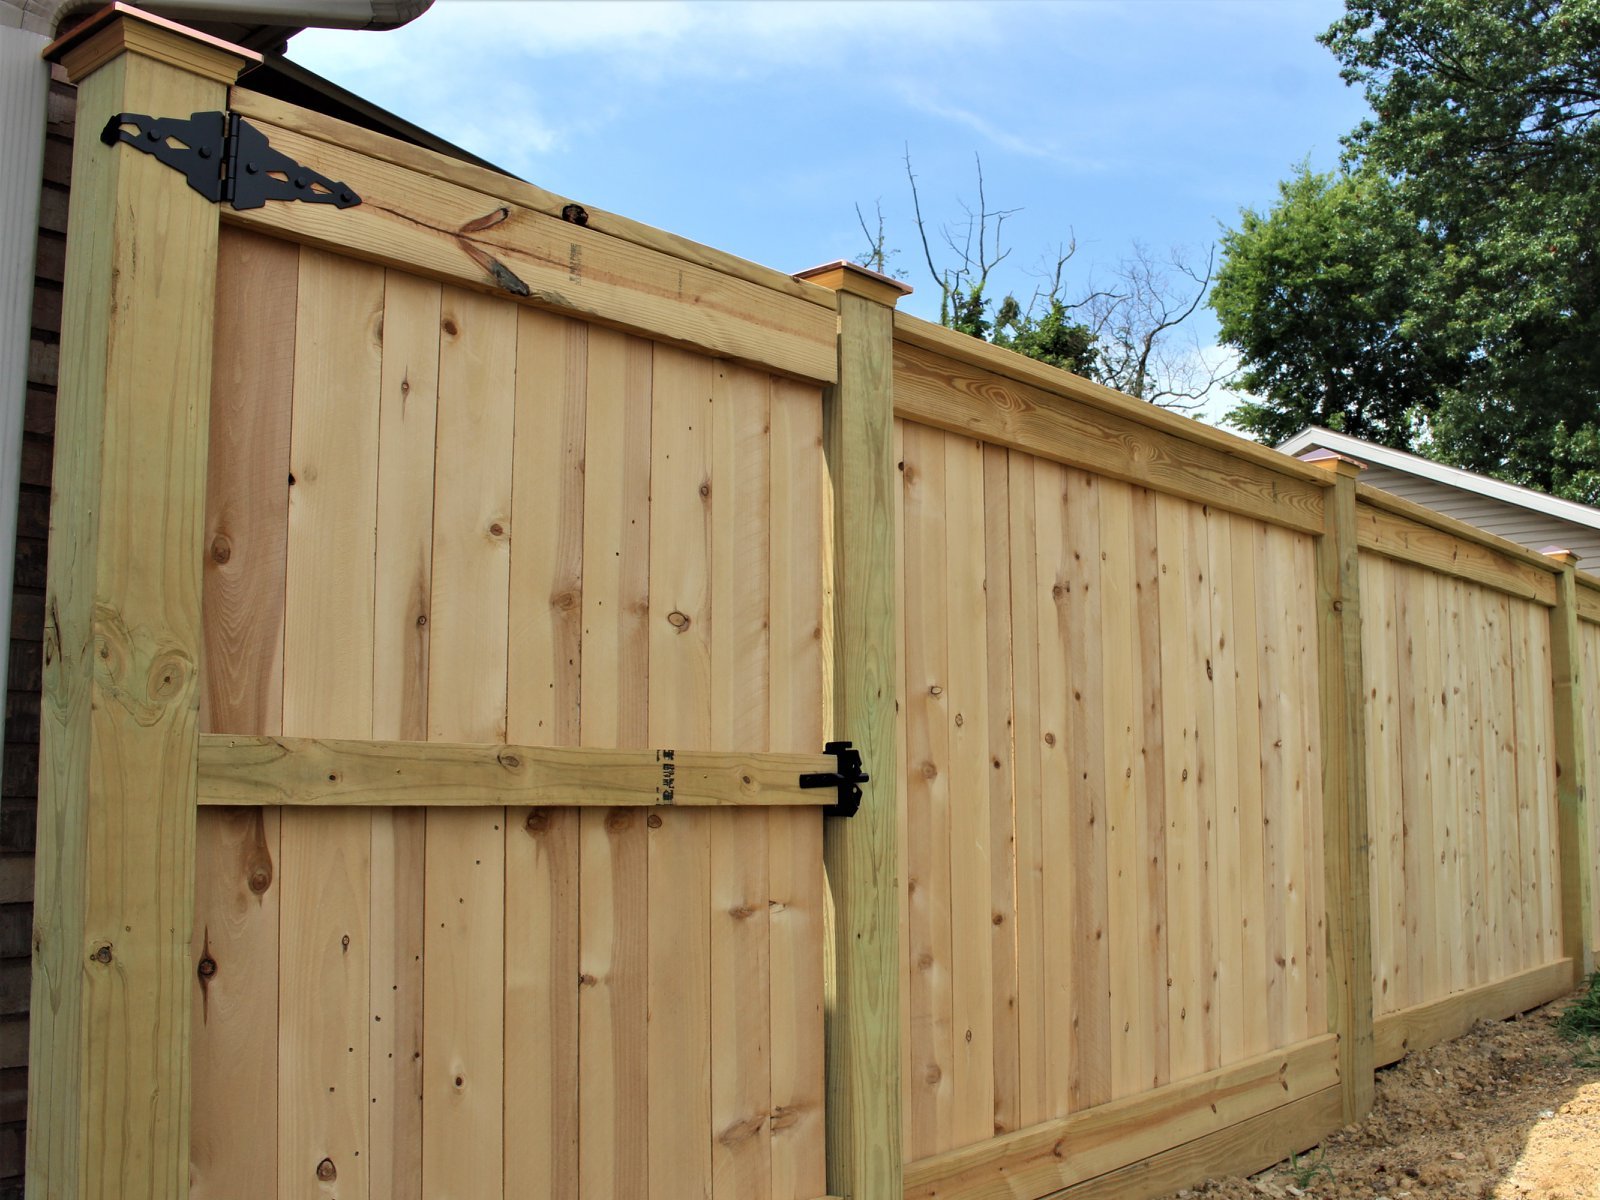 Fairfield Illinois wood privacy fencing